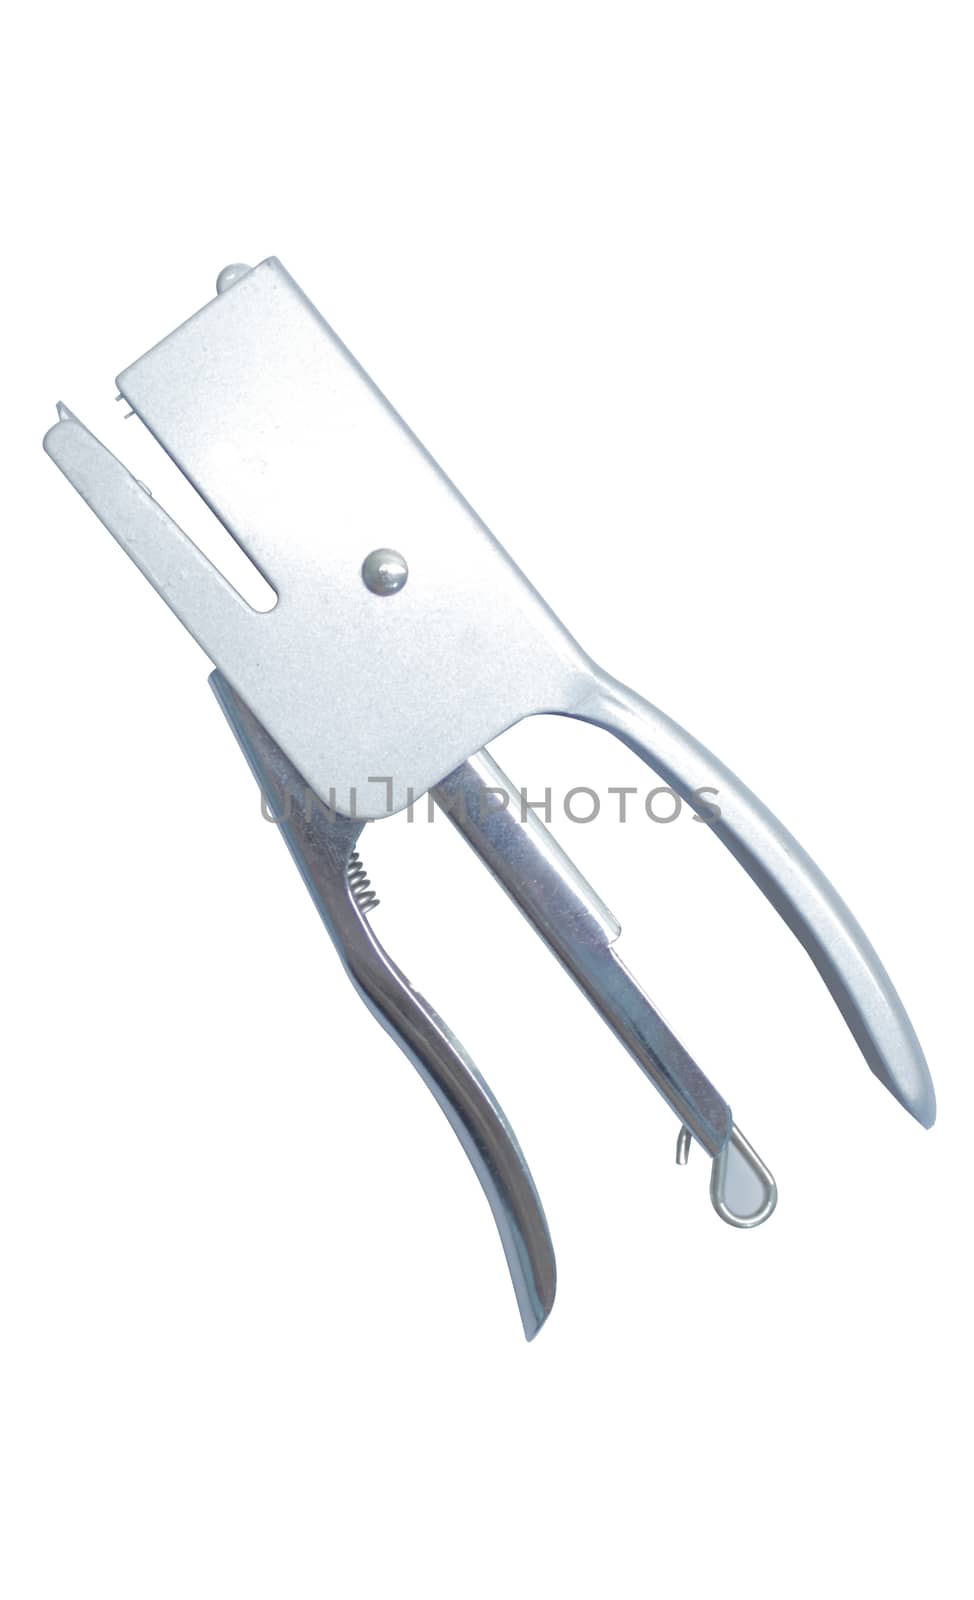 Light grey insulated metal stapler on a white background .Texture or background by Mastak80